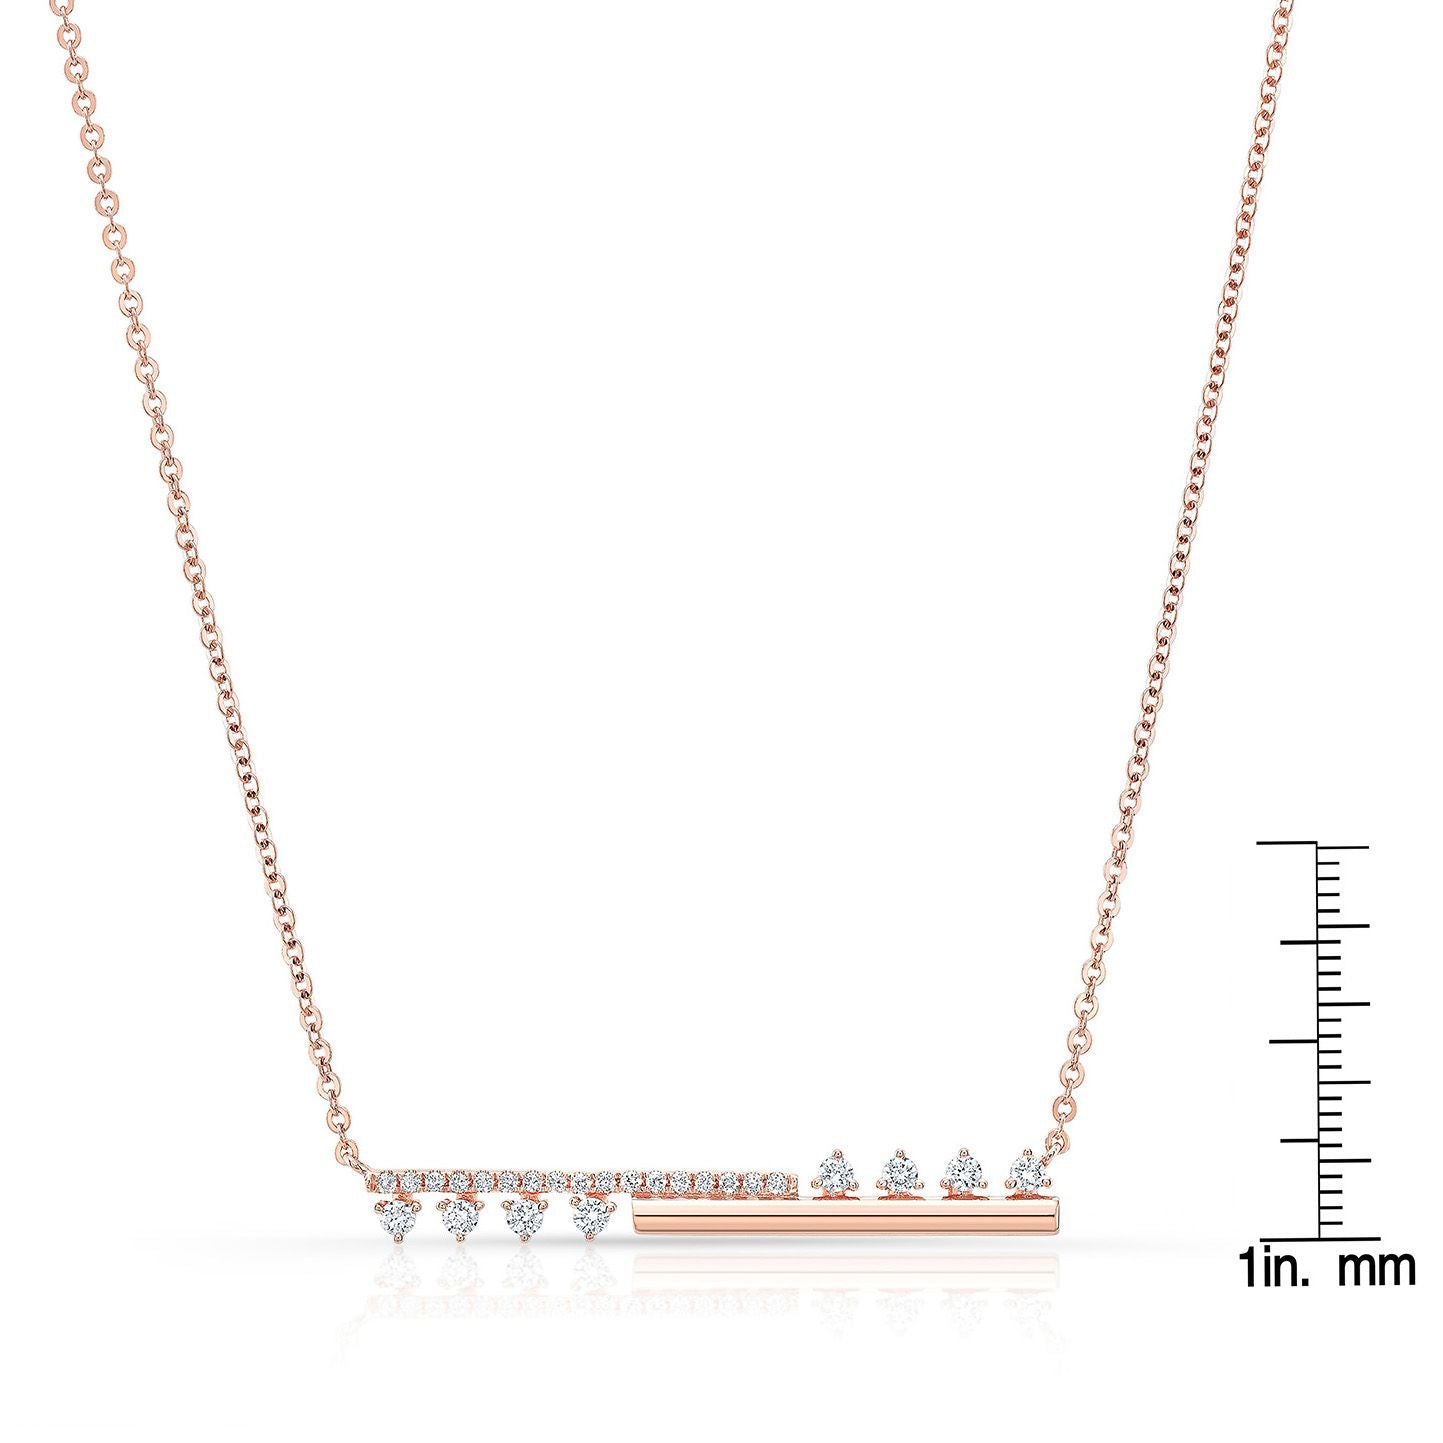 Diamond Half-bar And Pave Necklace With Prong-set Accents In 14k Rose Gold